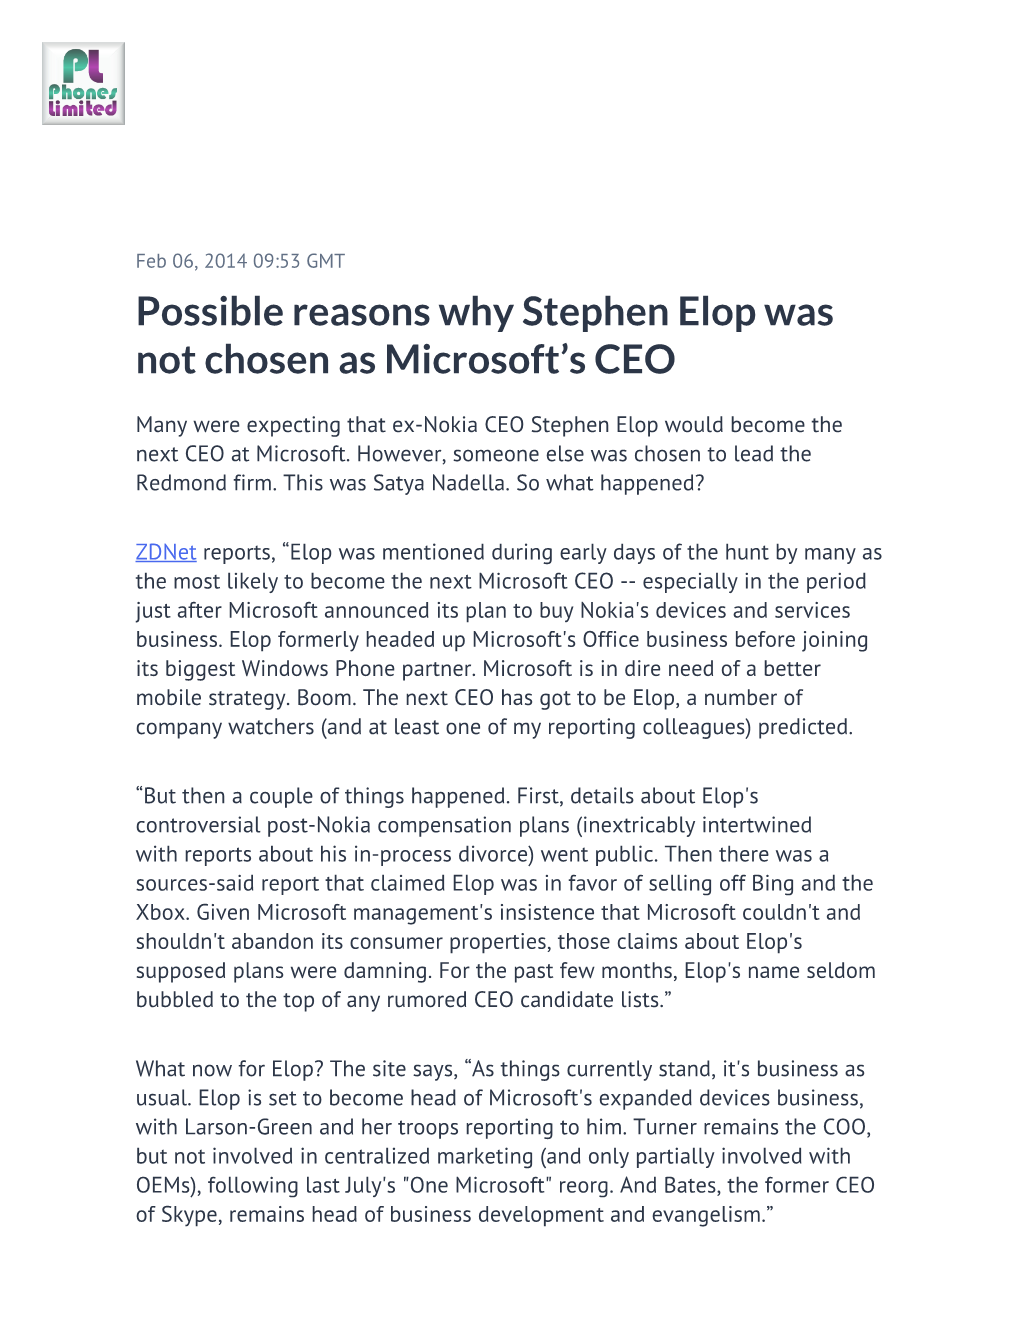 Possible Reasons Why Stephen Elop Was Not Chosen As Microsoft's